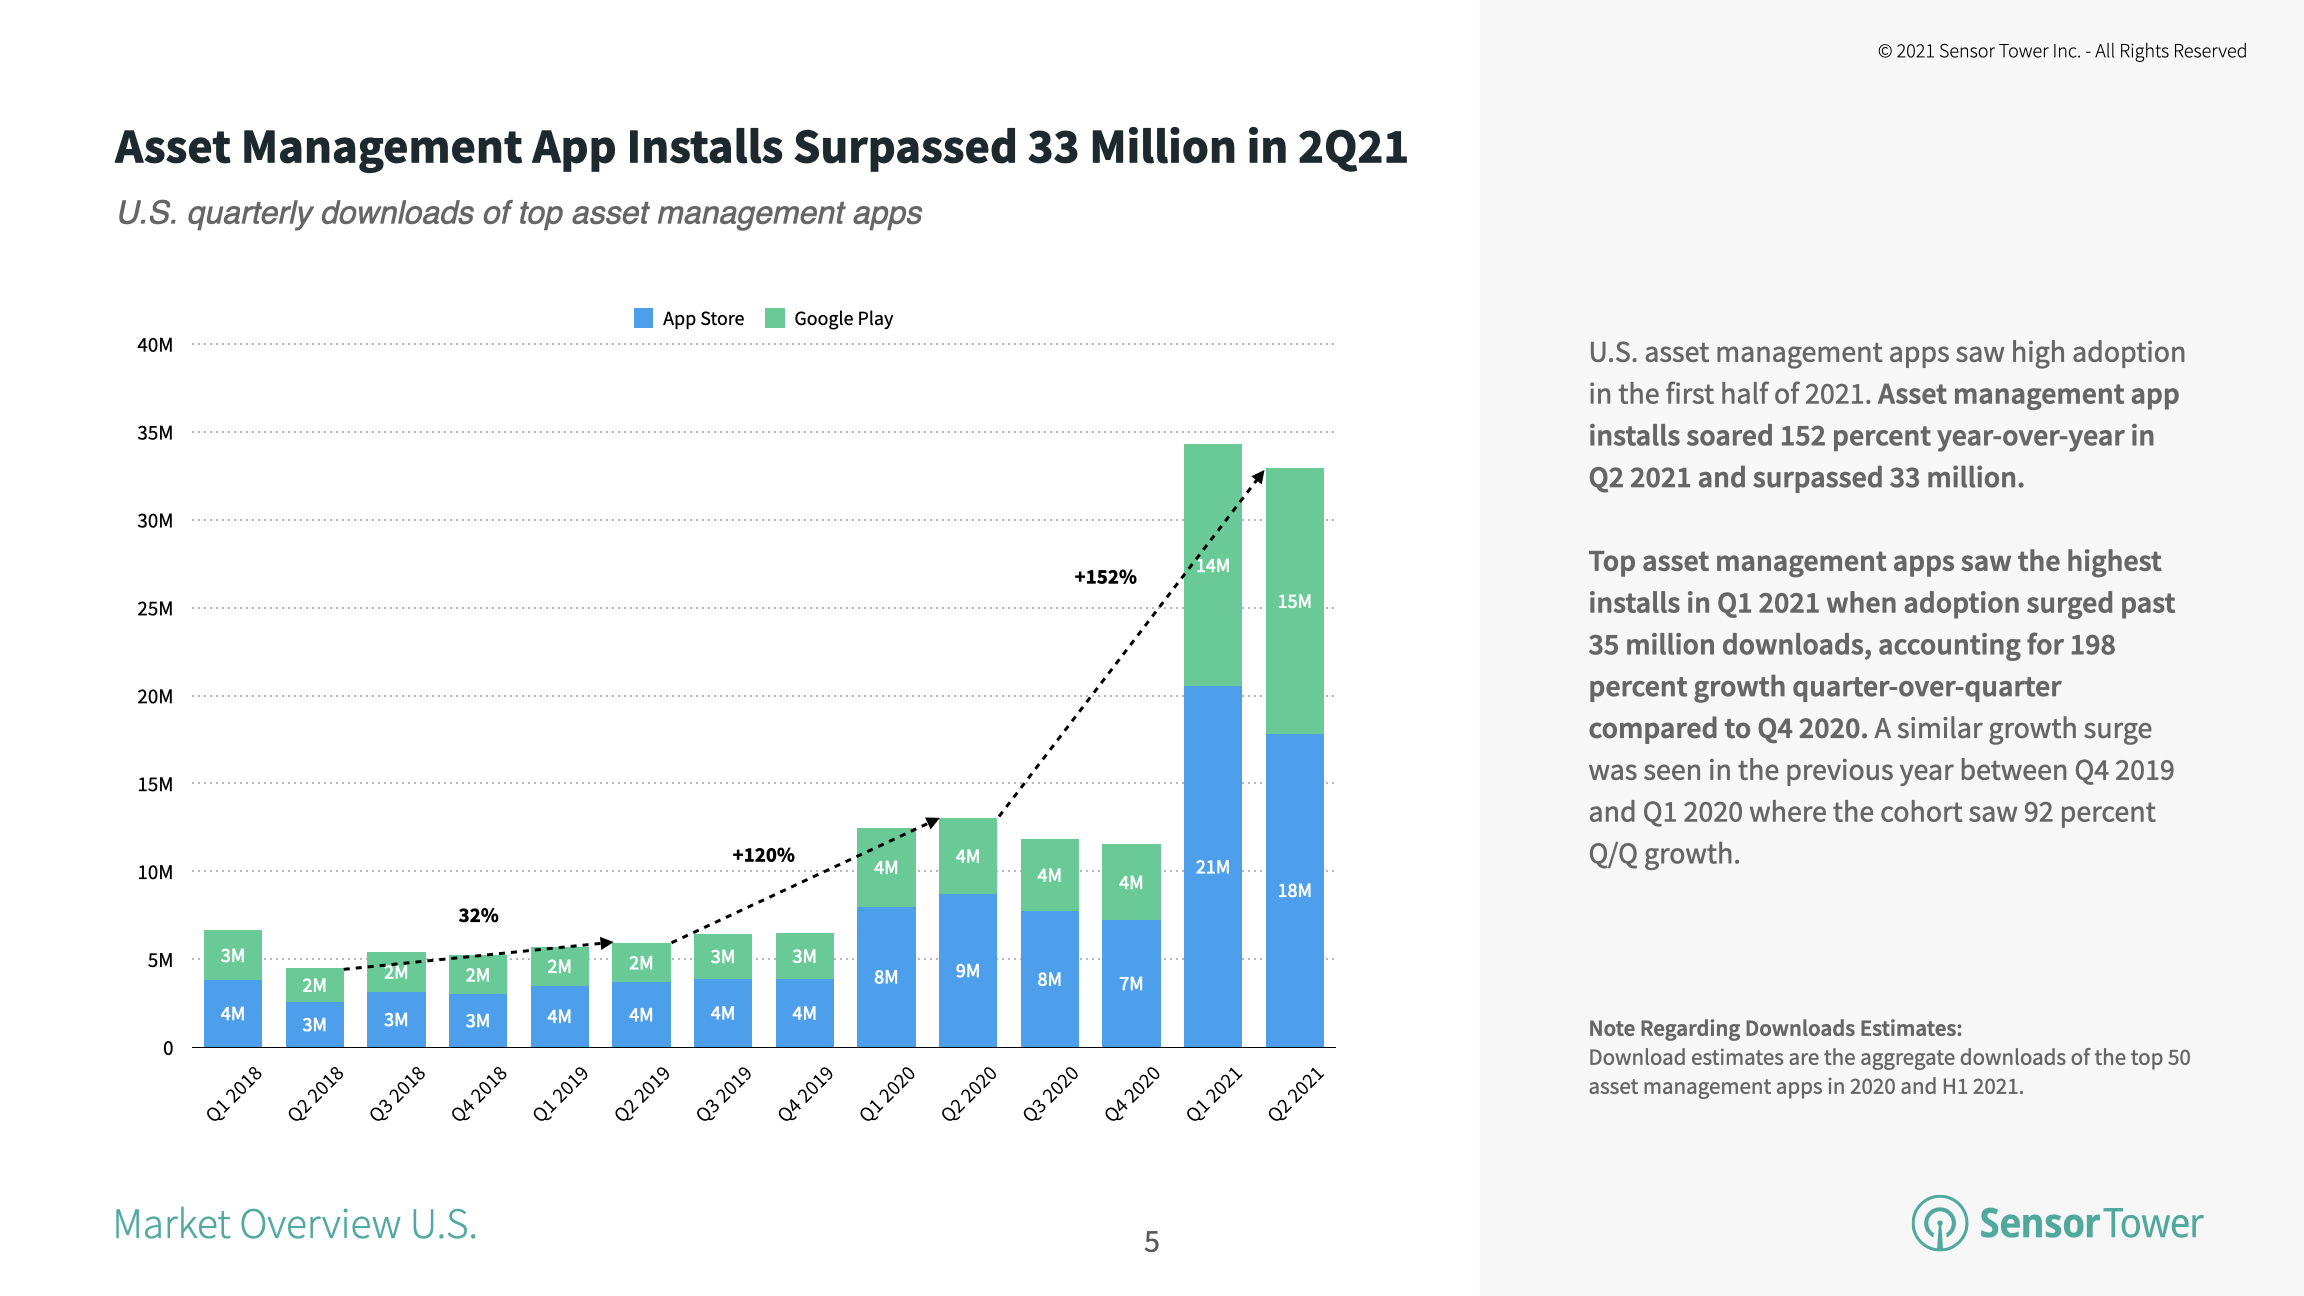 Top asset management apps climbed 198 percent quarter-over-quarter in Q1 2021 to more than 35 million downloads